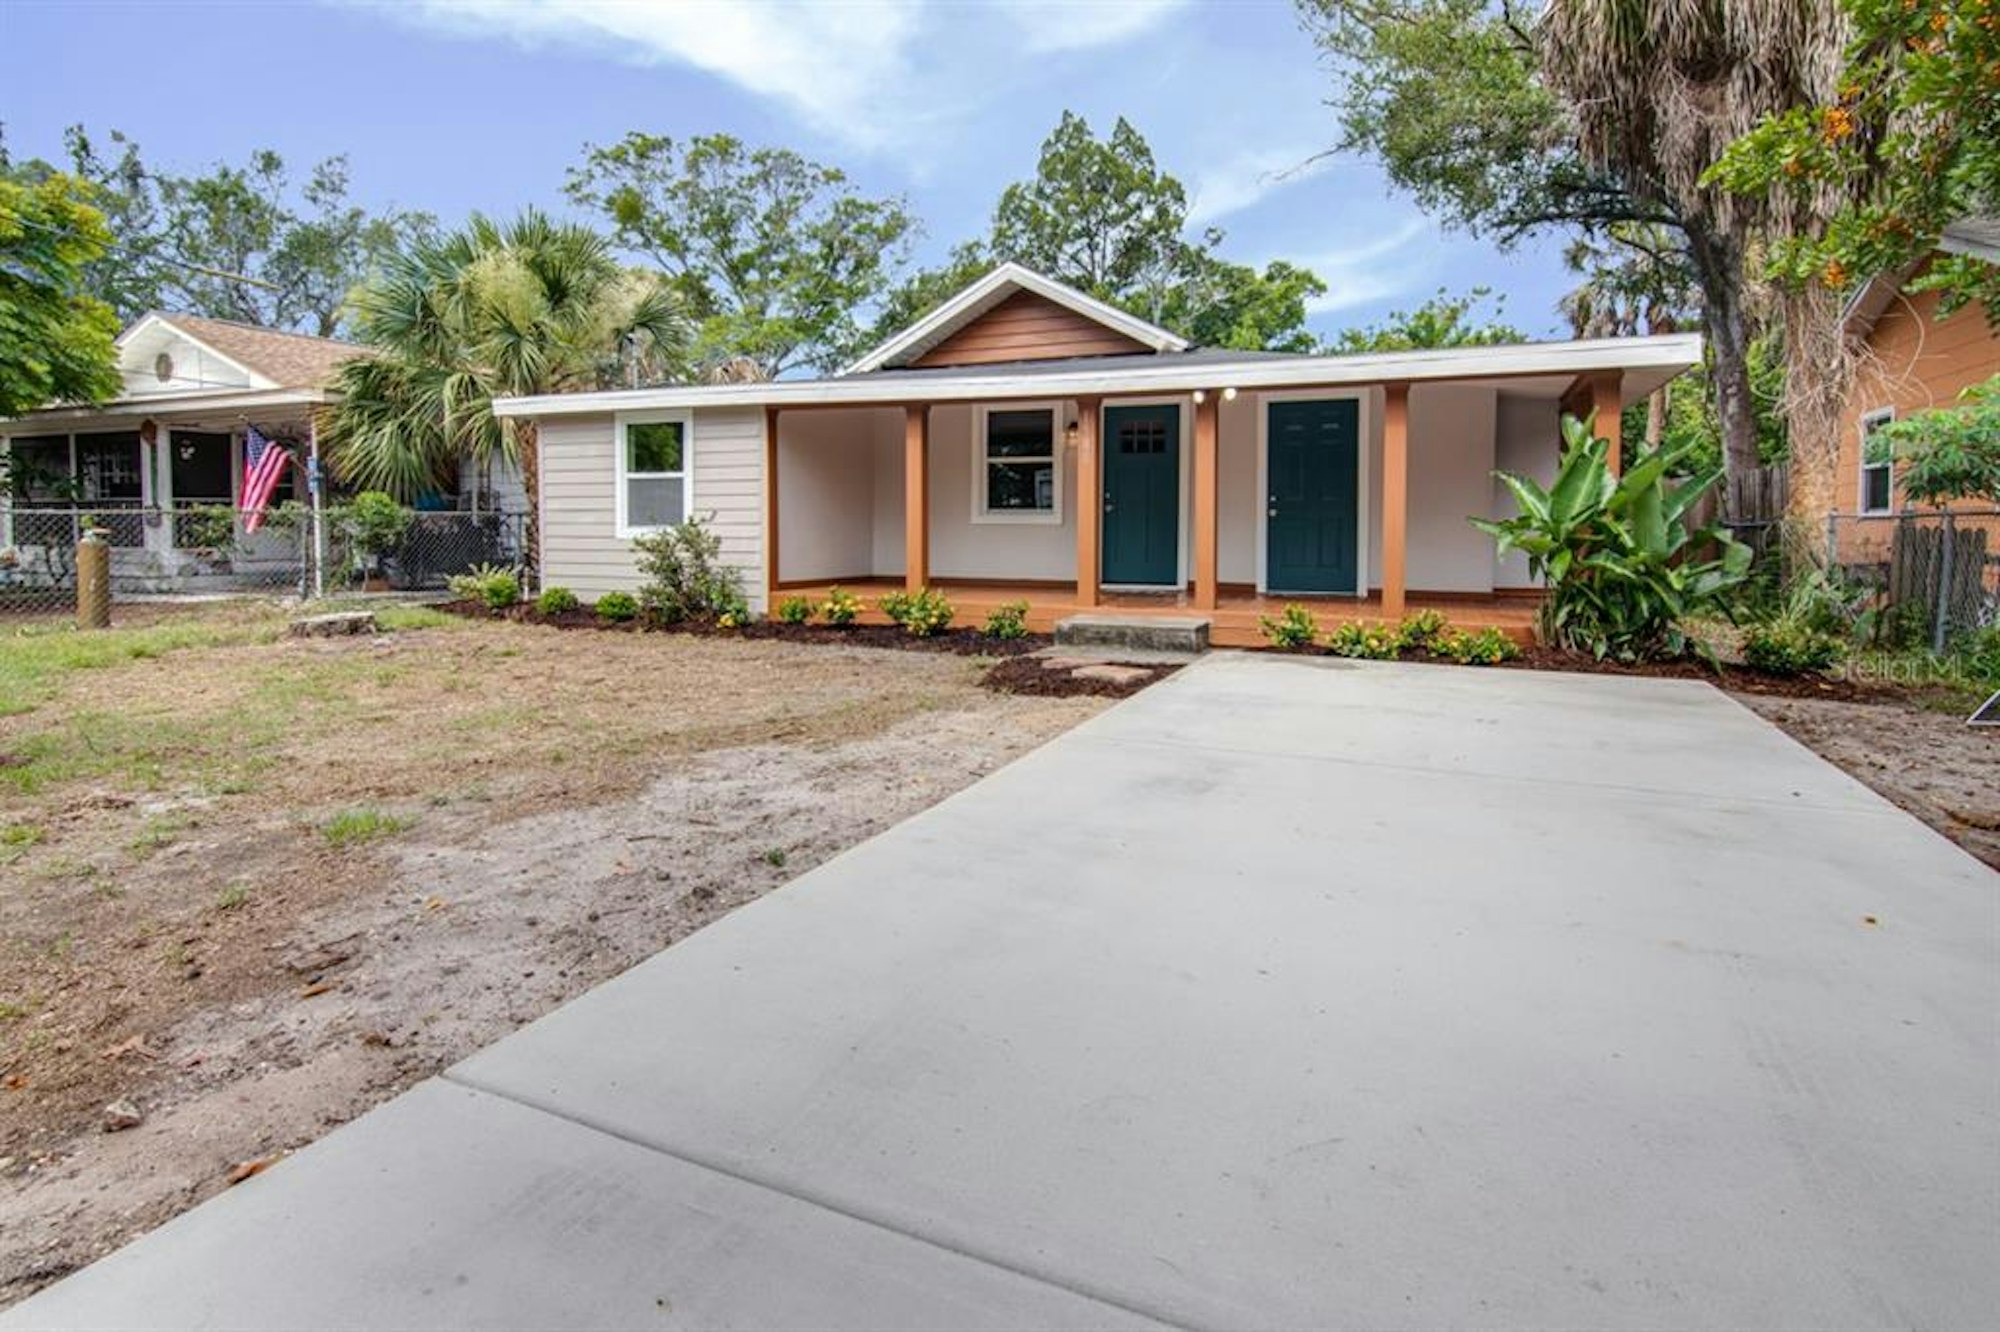 Photo 1 of 31 - 1580 Tioga Ave, Clearwater, FL 33756